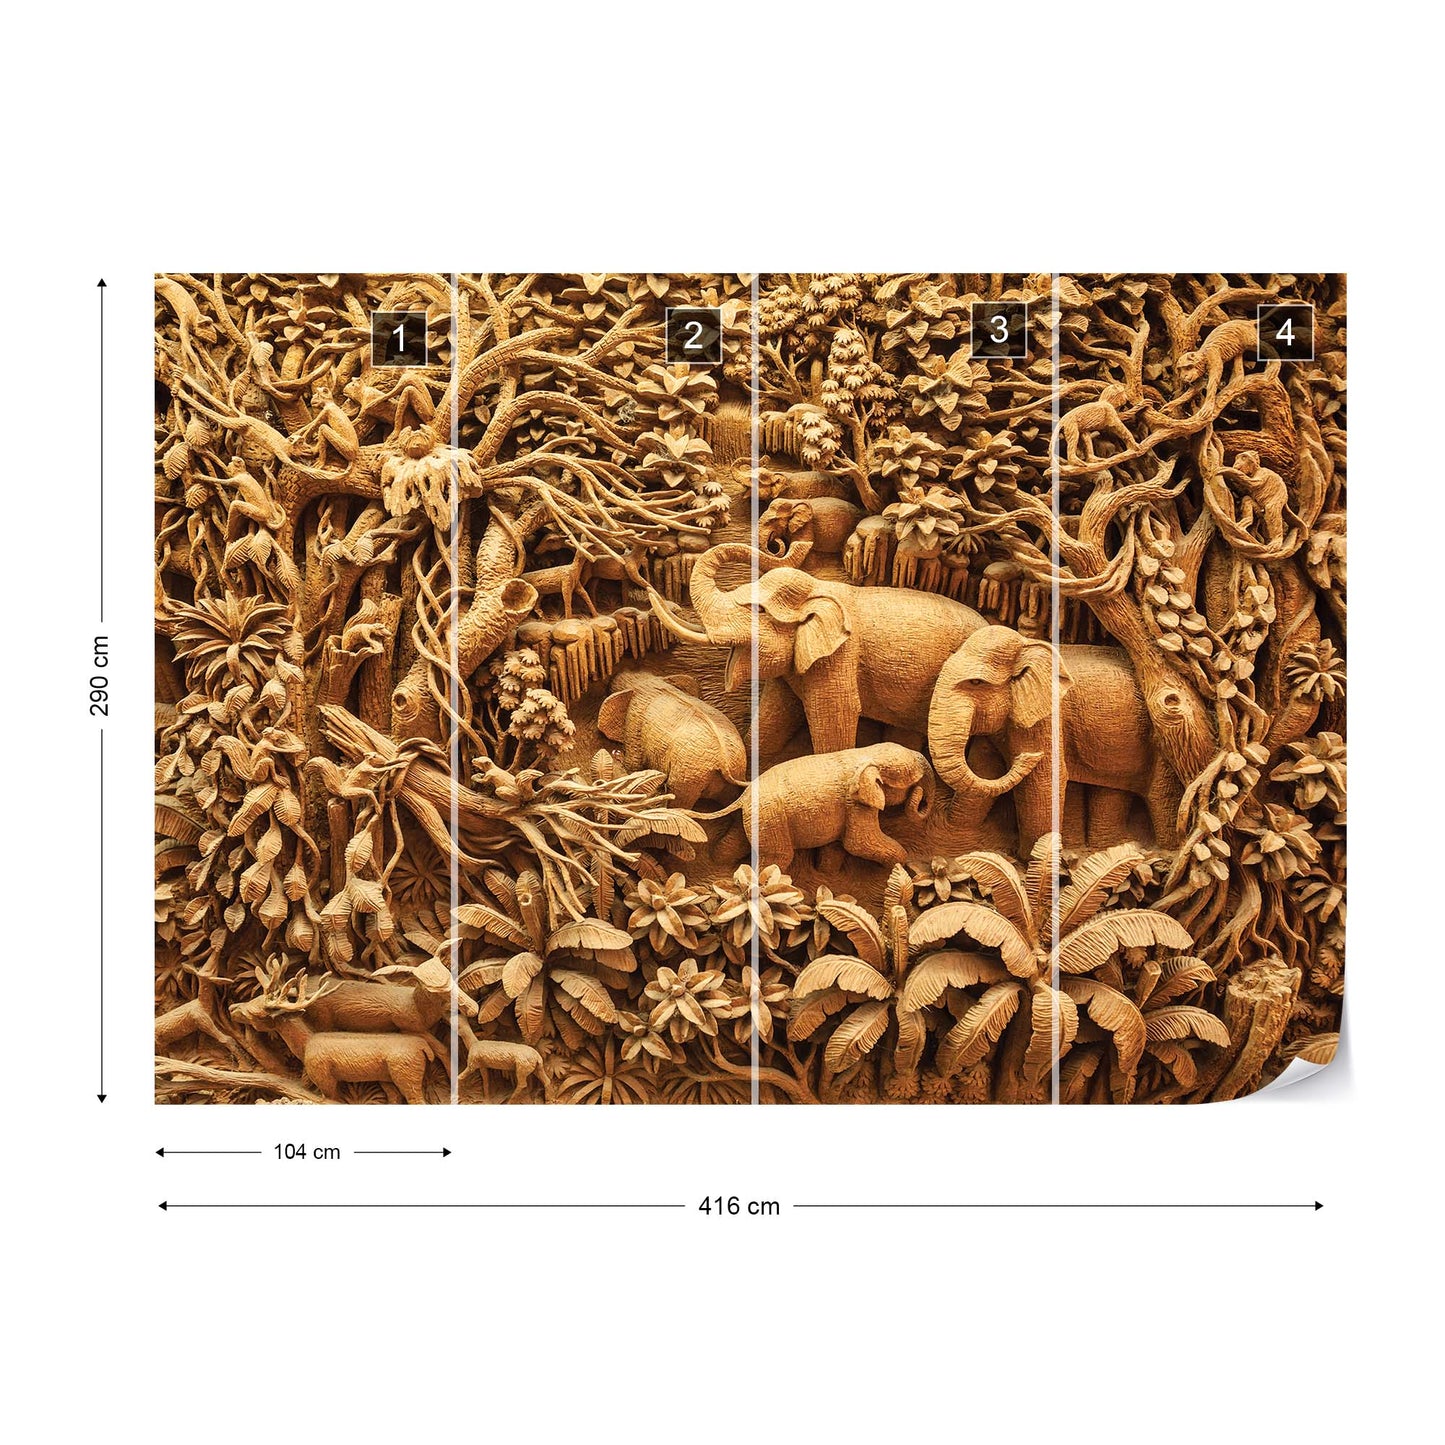 3D Carved Wood Jungle Elephants Sepia Photo Wallpaper Wall Mural - USTAD HOME